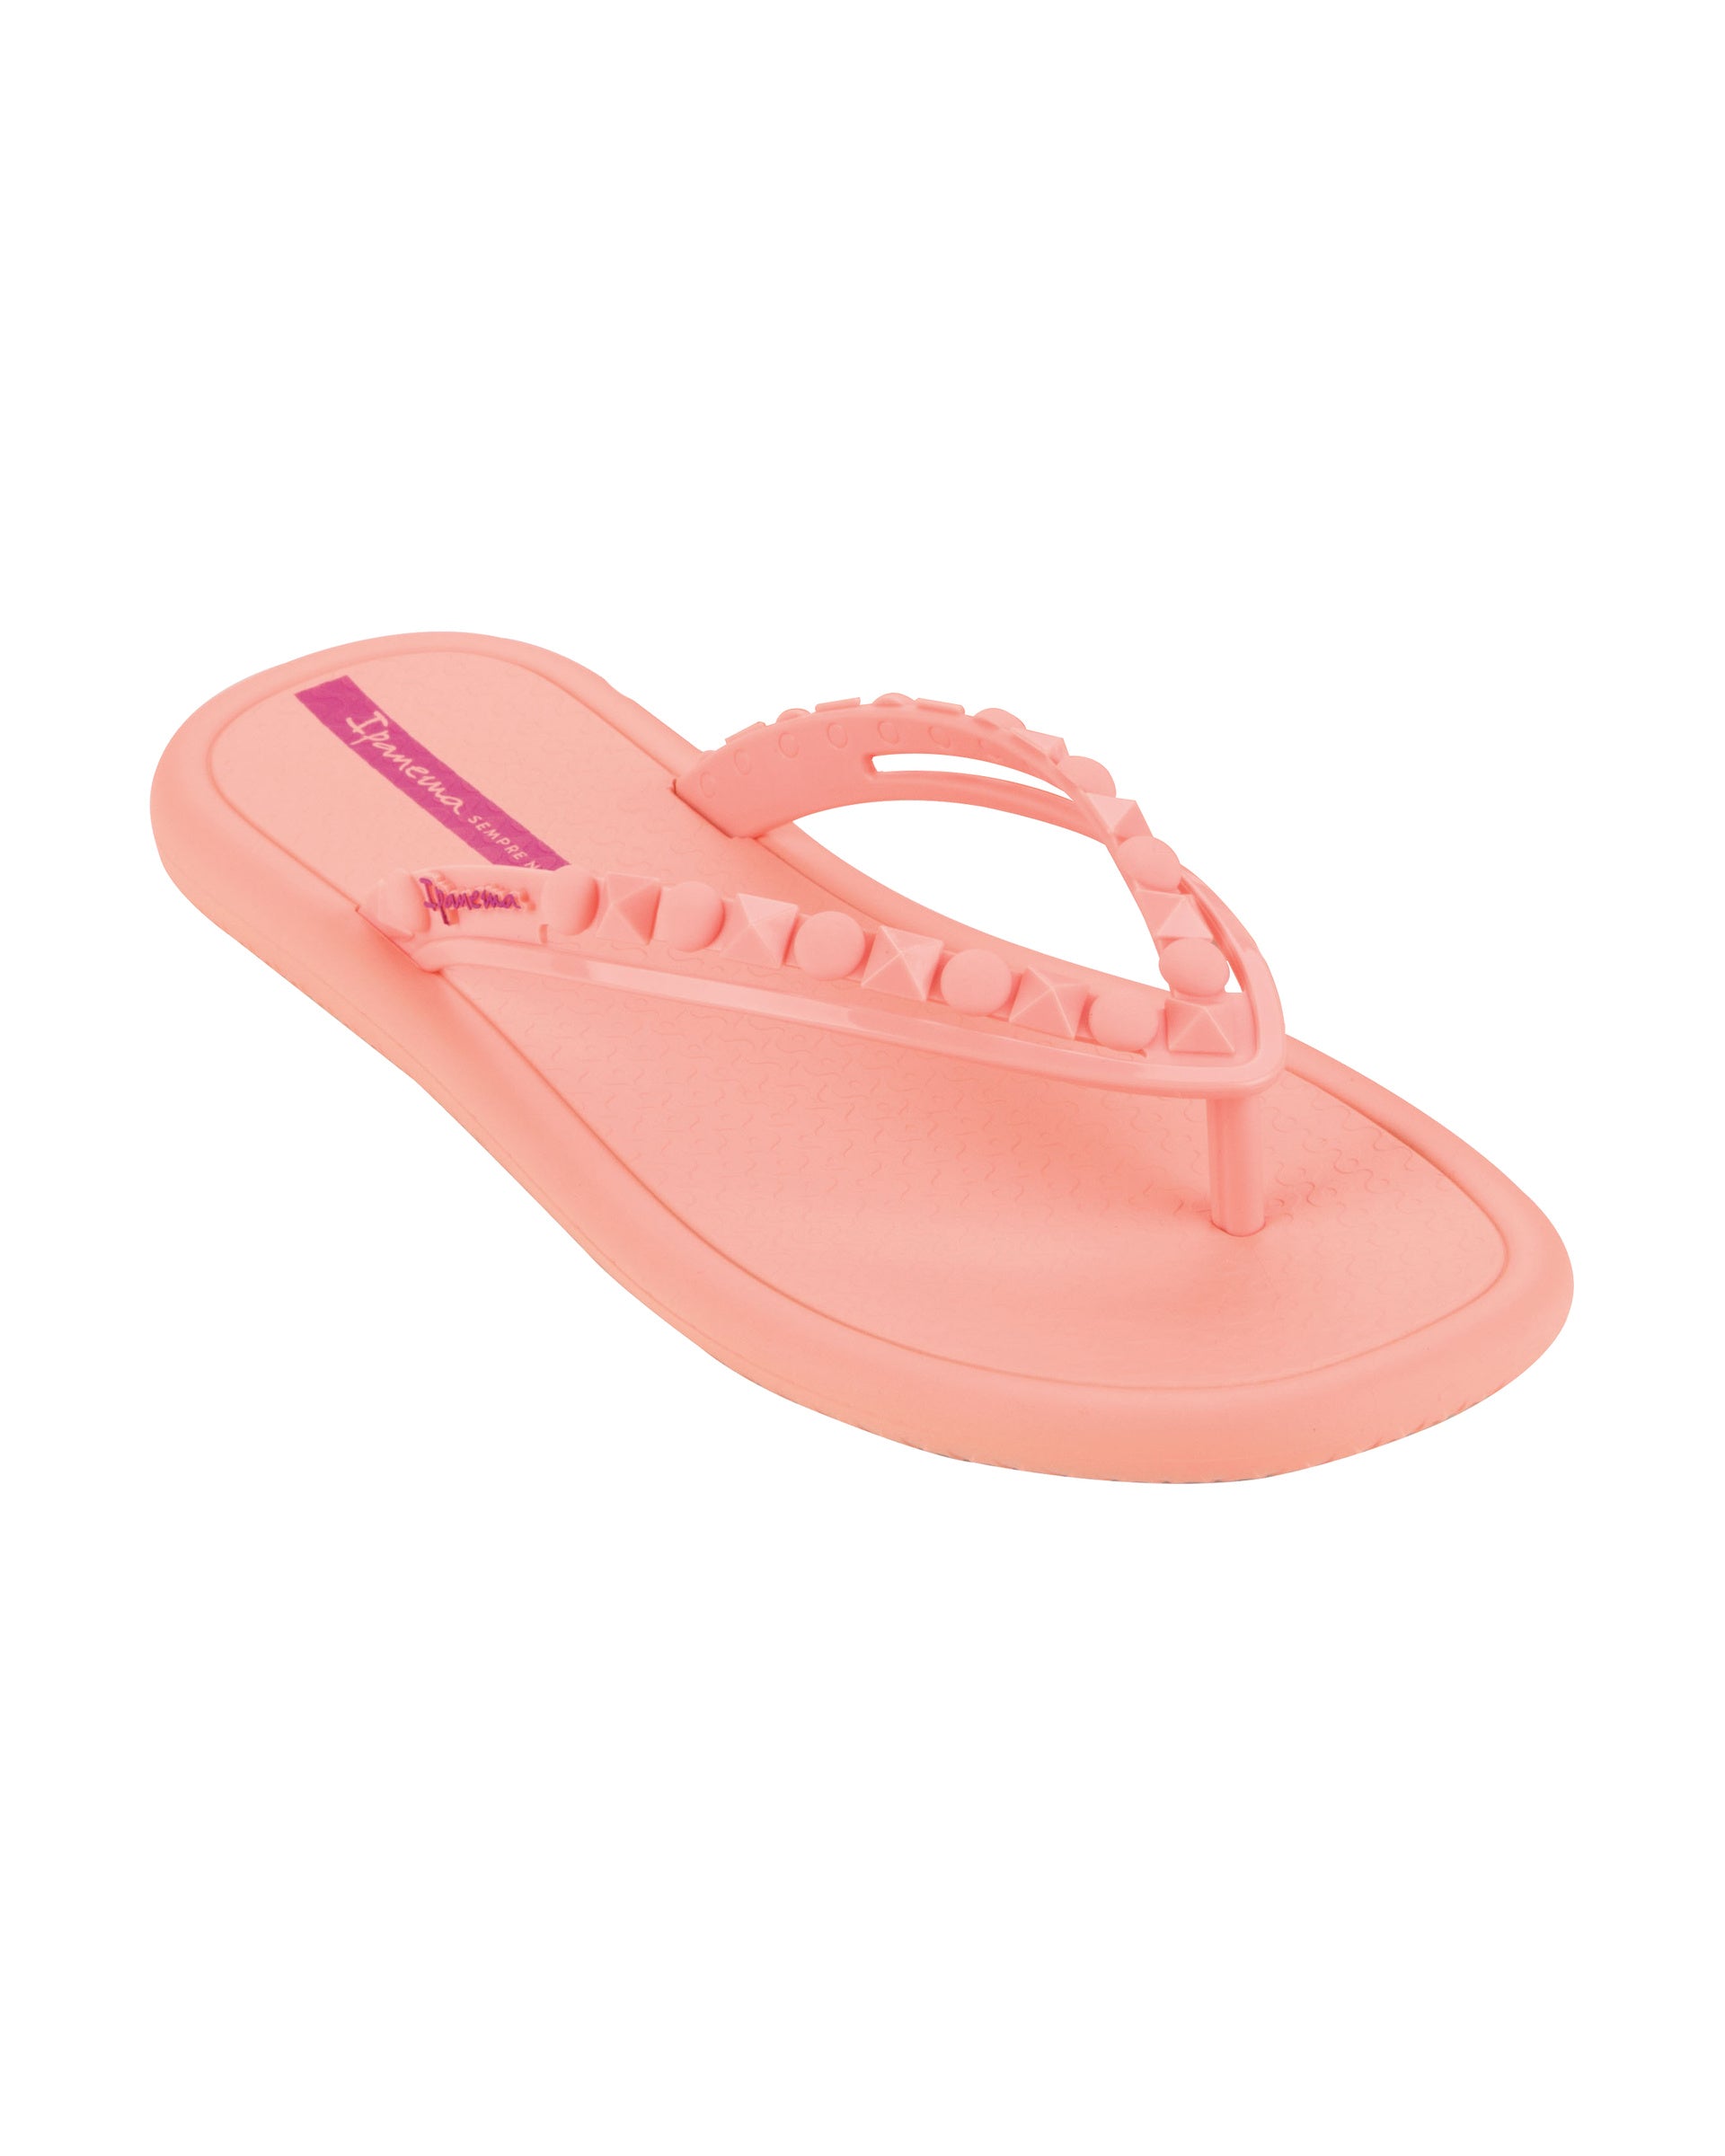 Angled view of a light pink Ipanema Meu Sol women's flip flop with stud details on strap.